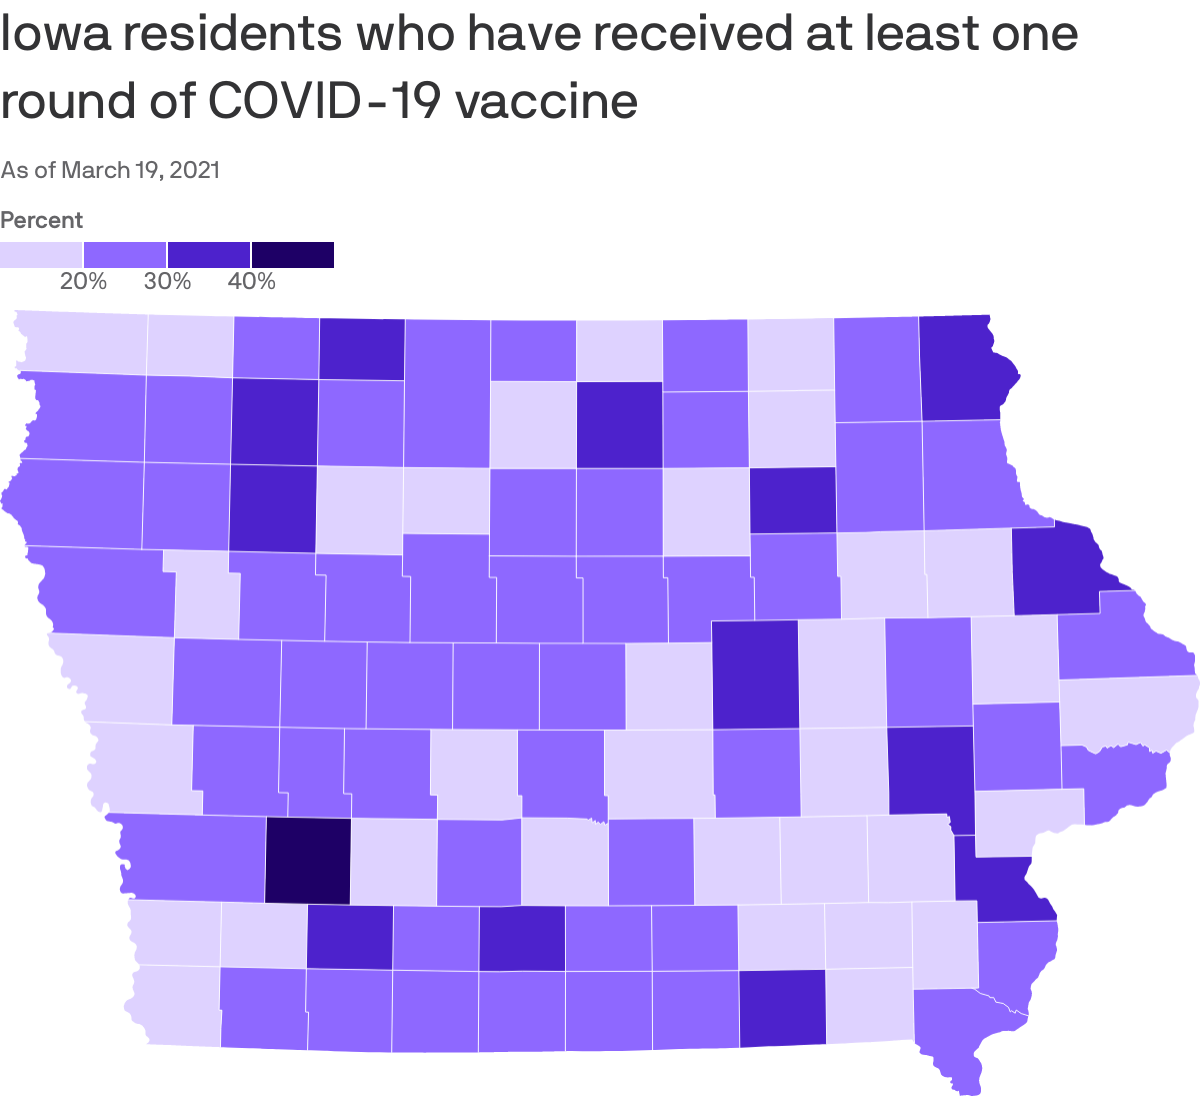 Iowa residents who have received at least one round of COVID-19 vaccine